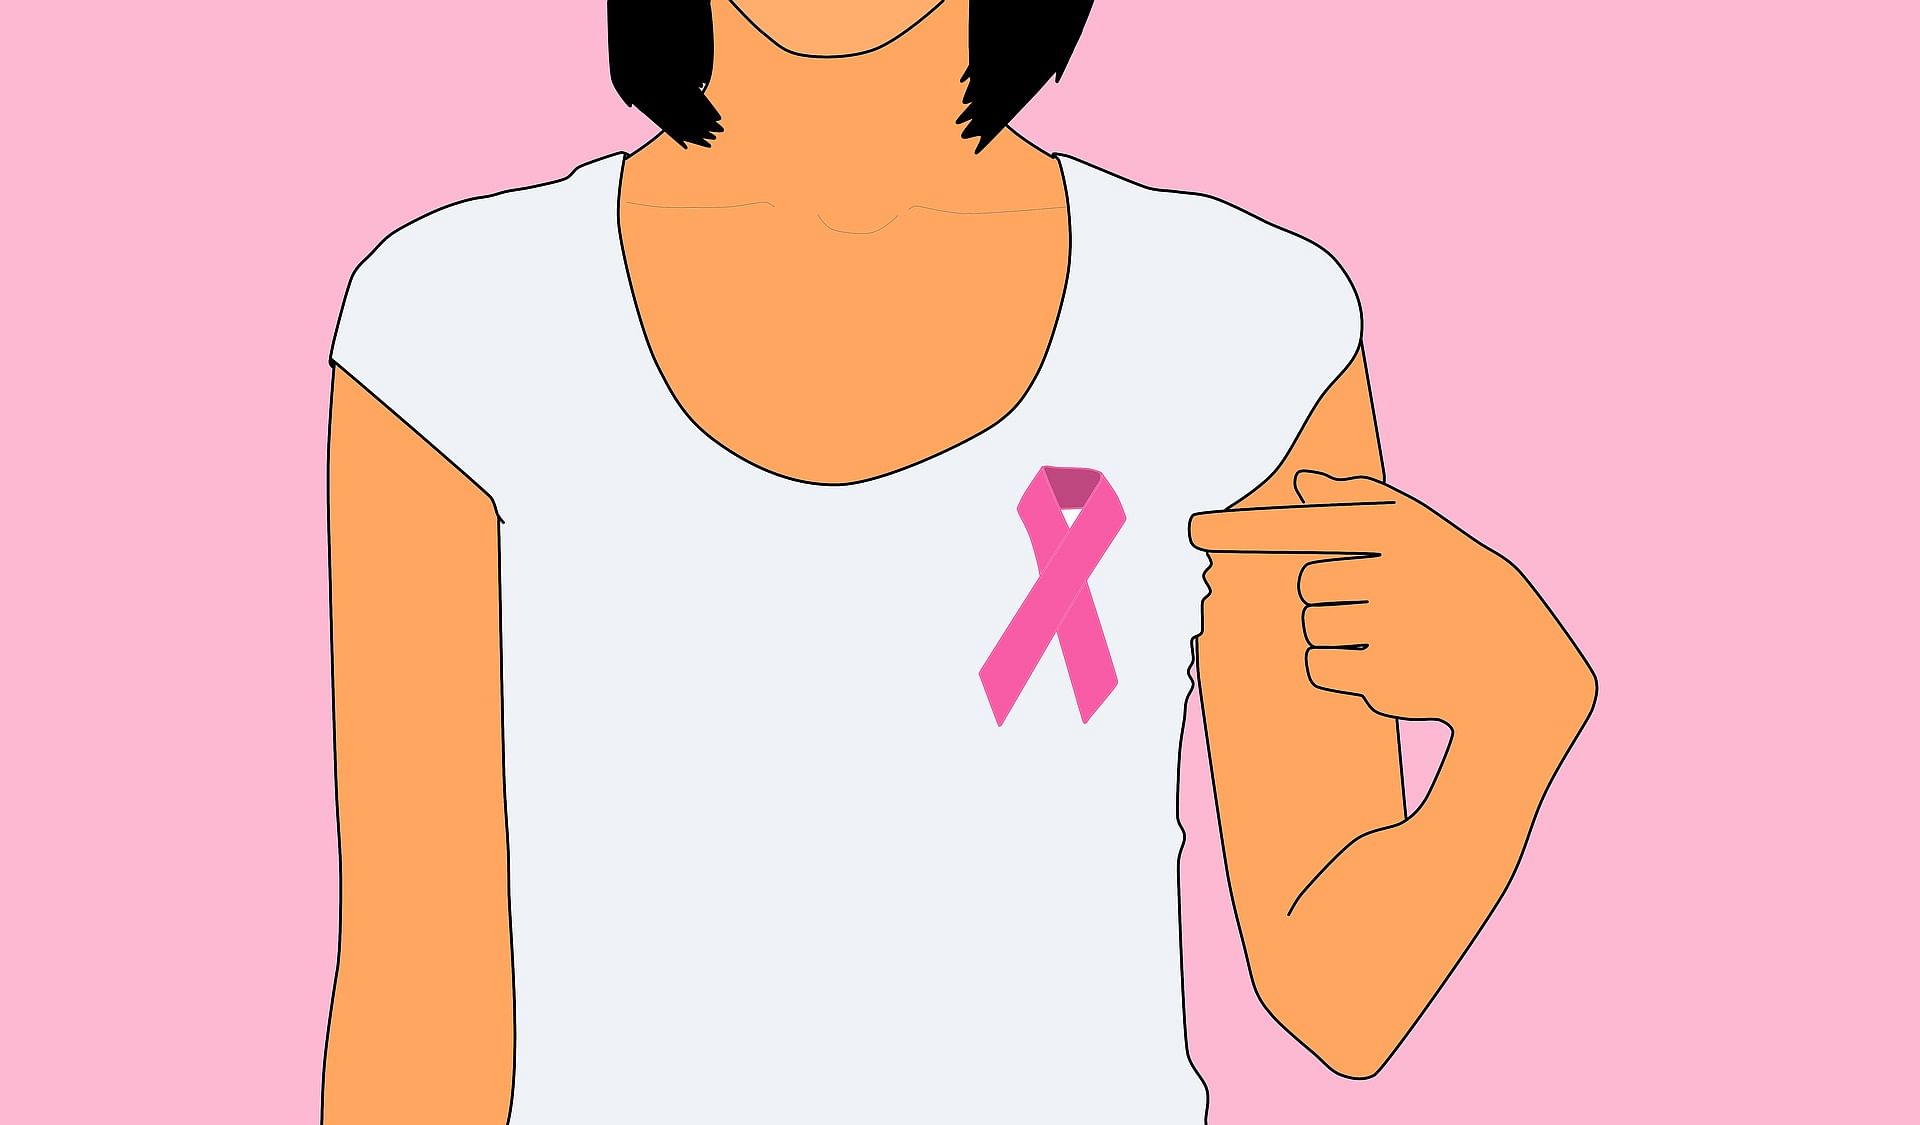 Home remedies for minimising the risk of breast cancer